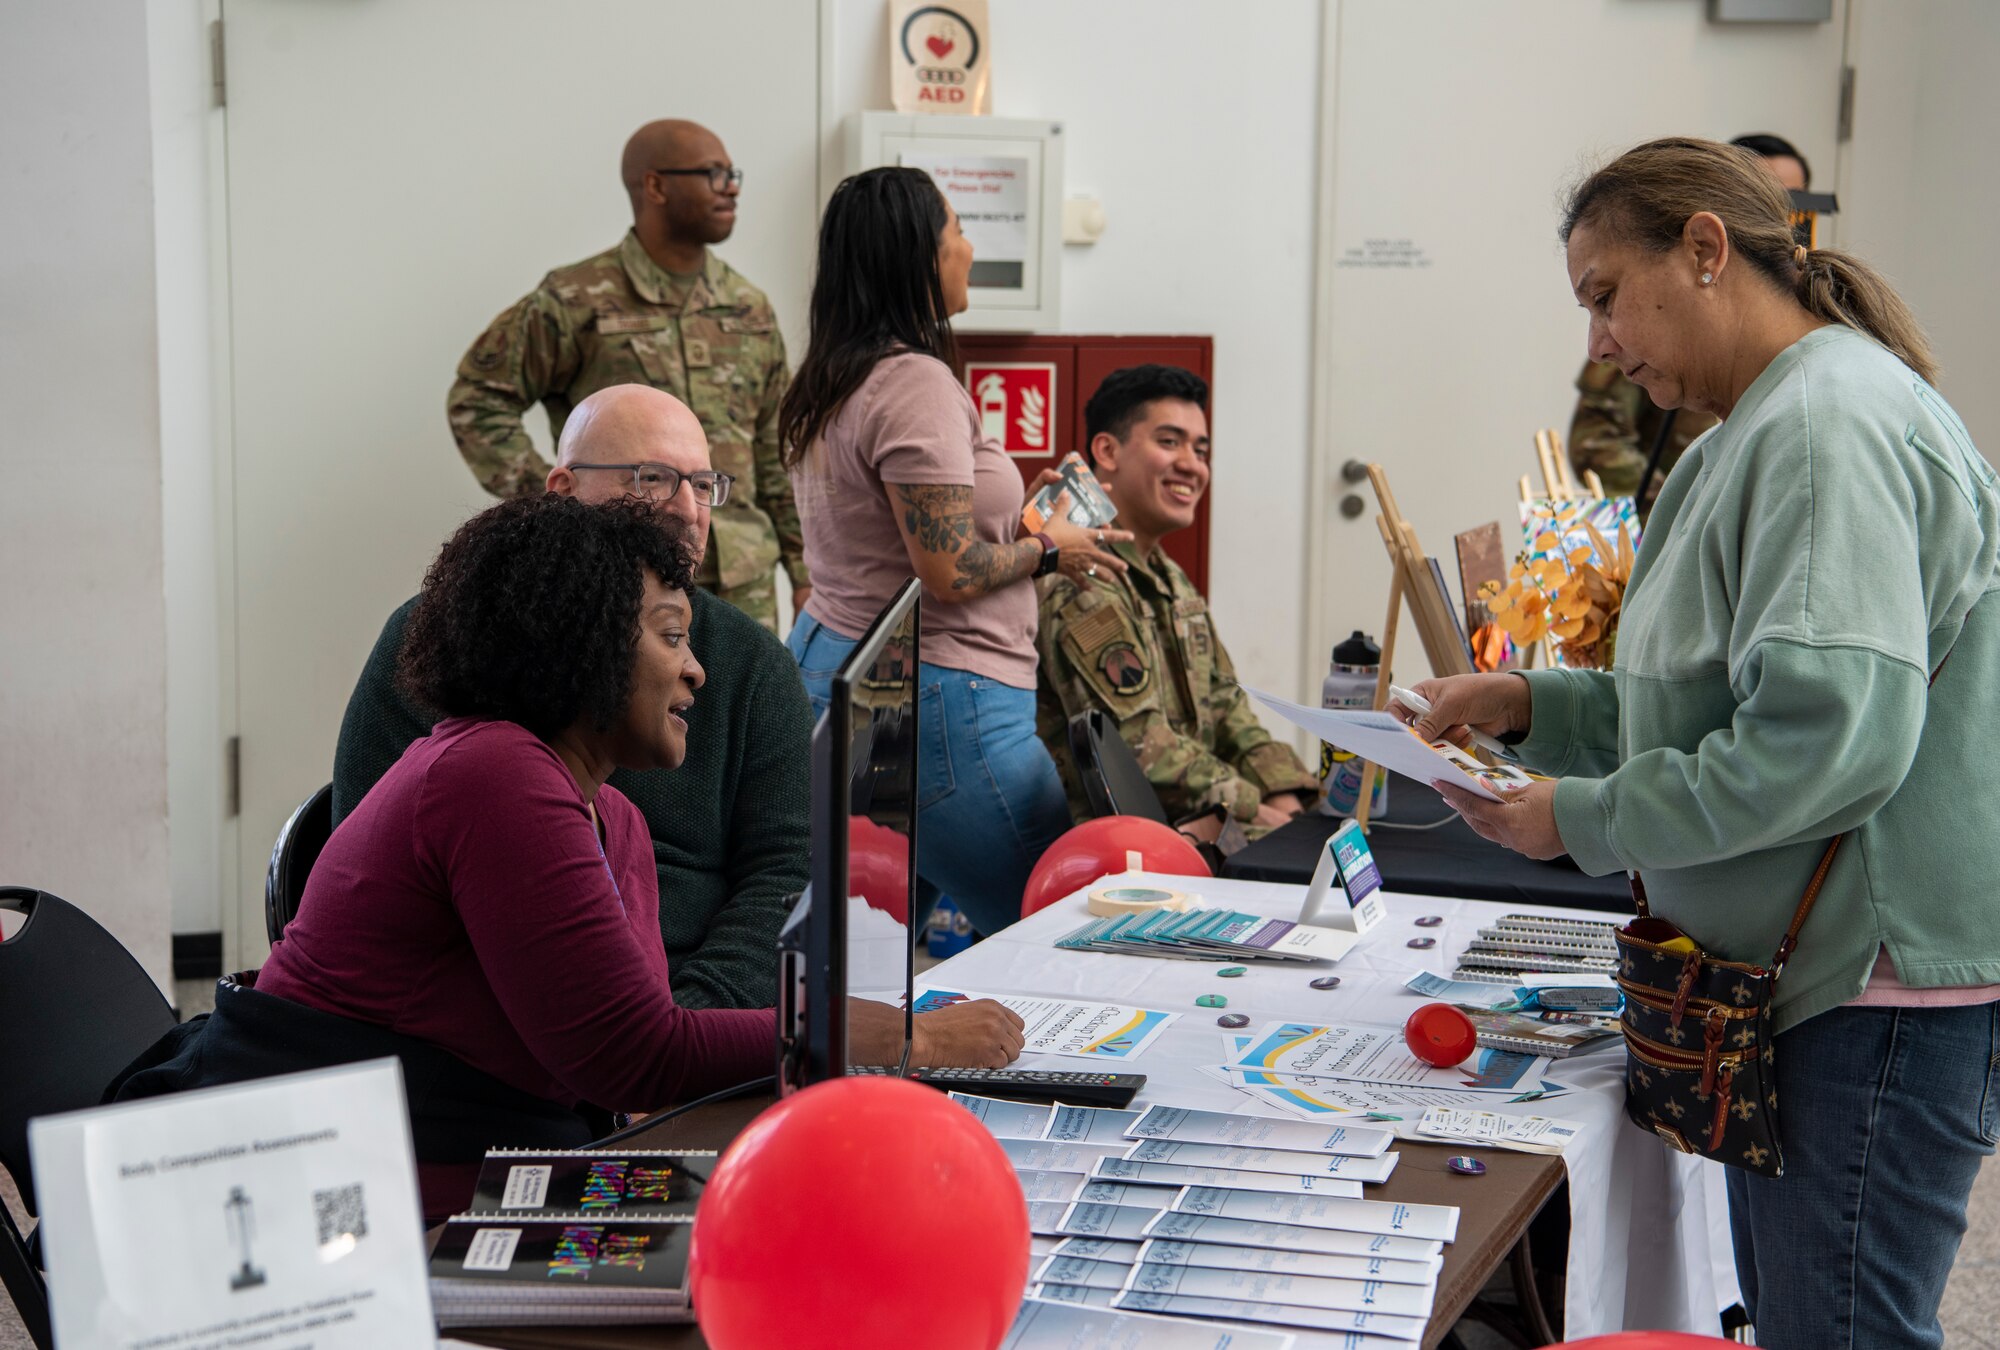 Lashanda Palmer, left, 86th Airlift Wing violence prevention integrator, discusses available resources with a visitor during an e-CheckUptoGo information fair at Ramstein Air Base, Germany, April 27, 2023.